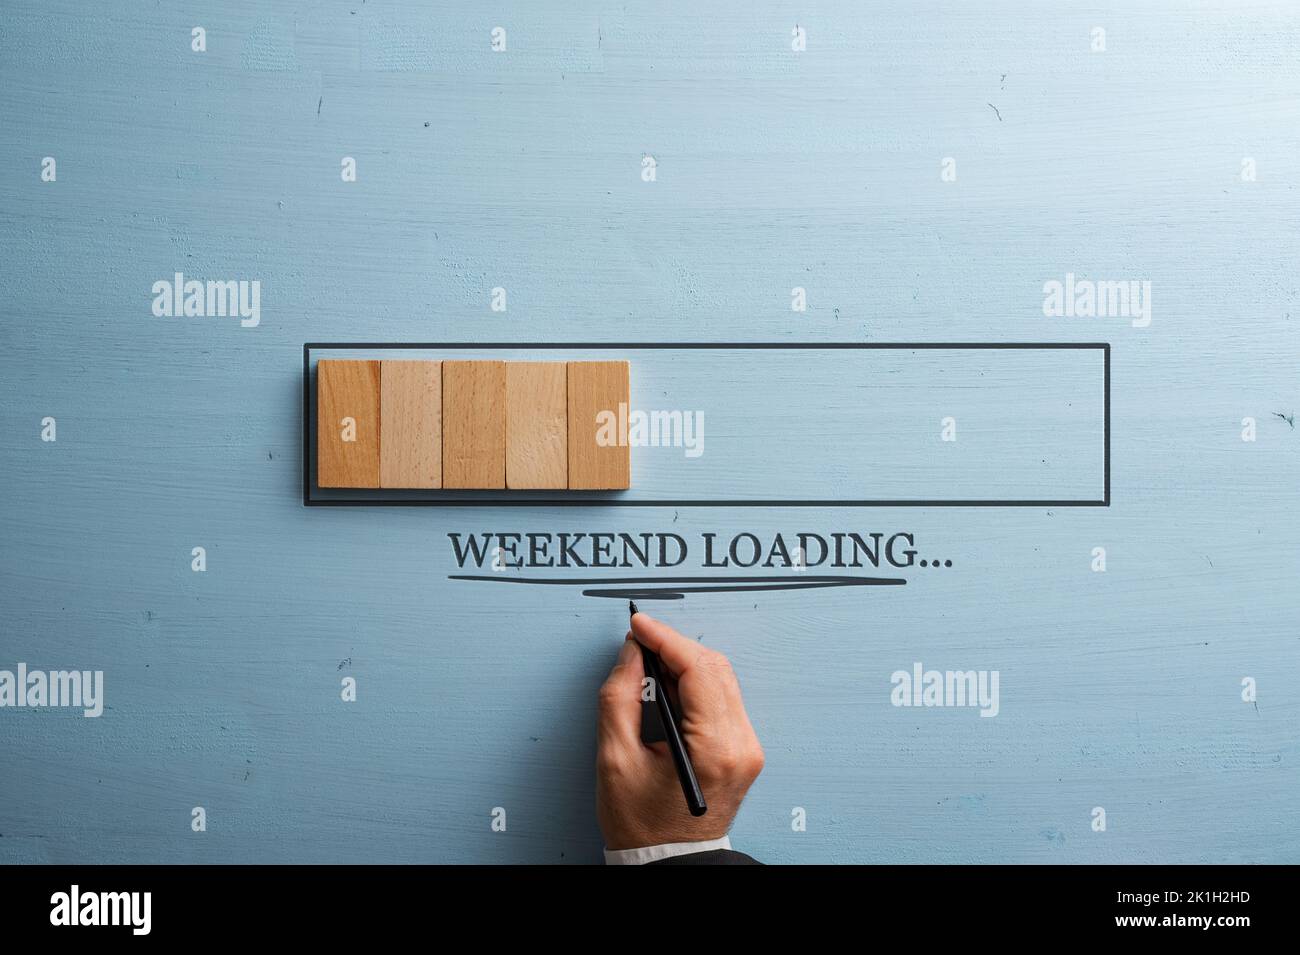 Male hand writing a Weekend loading sign under a loading bar made of wooden dominos. Over pastel blue wooden background. Stock Photo